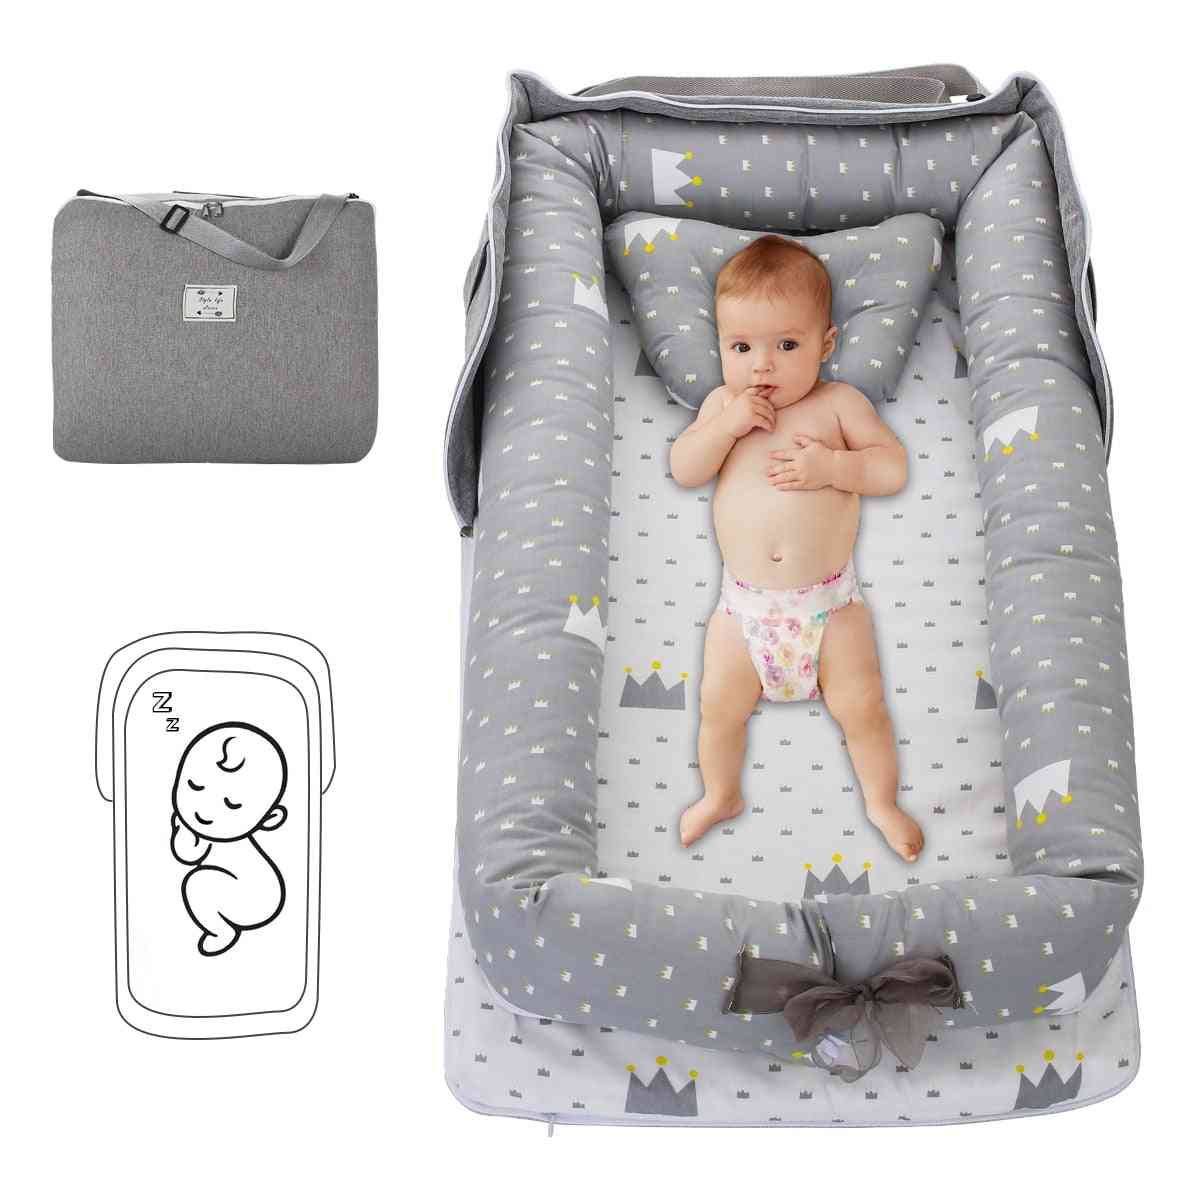 Baby Lounger Folding Portable Nest Bed For &, Infant Cotton Cradle Crib Travel Bedroom